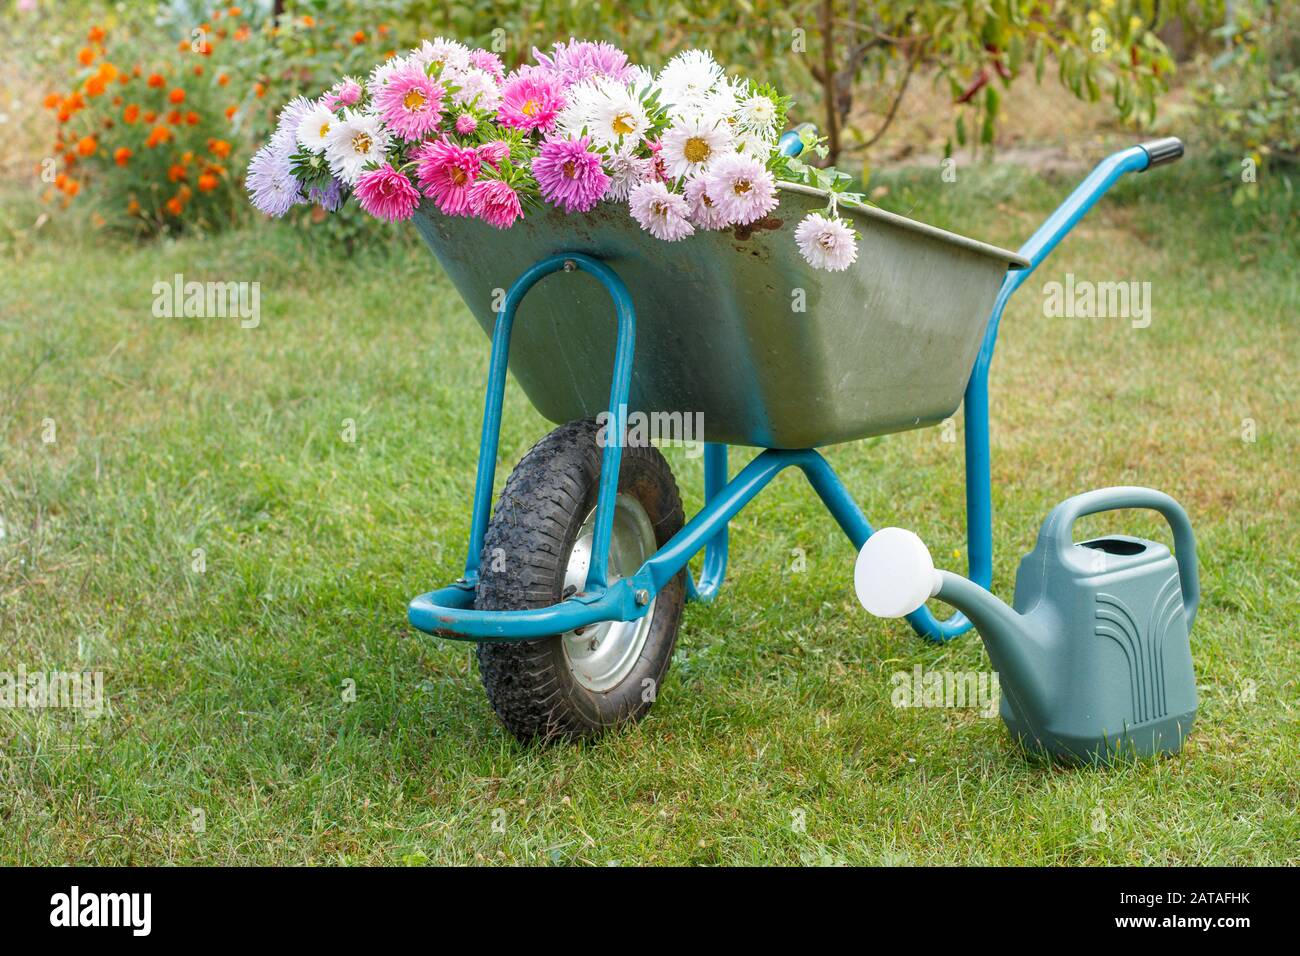 Morning after work in summer garden. Wheelbarrow with flowers, watering can on green grass. Stock Photo